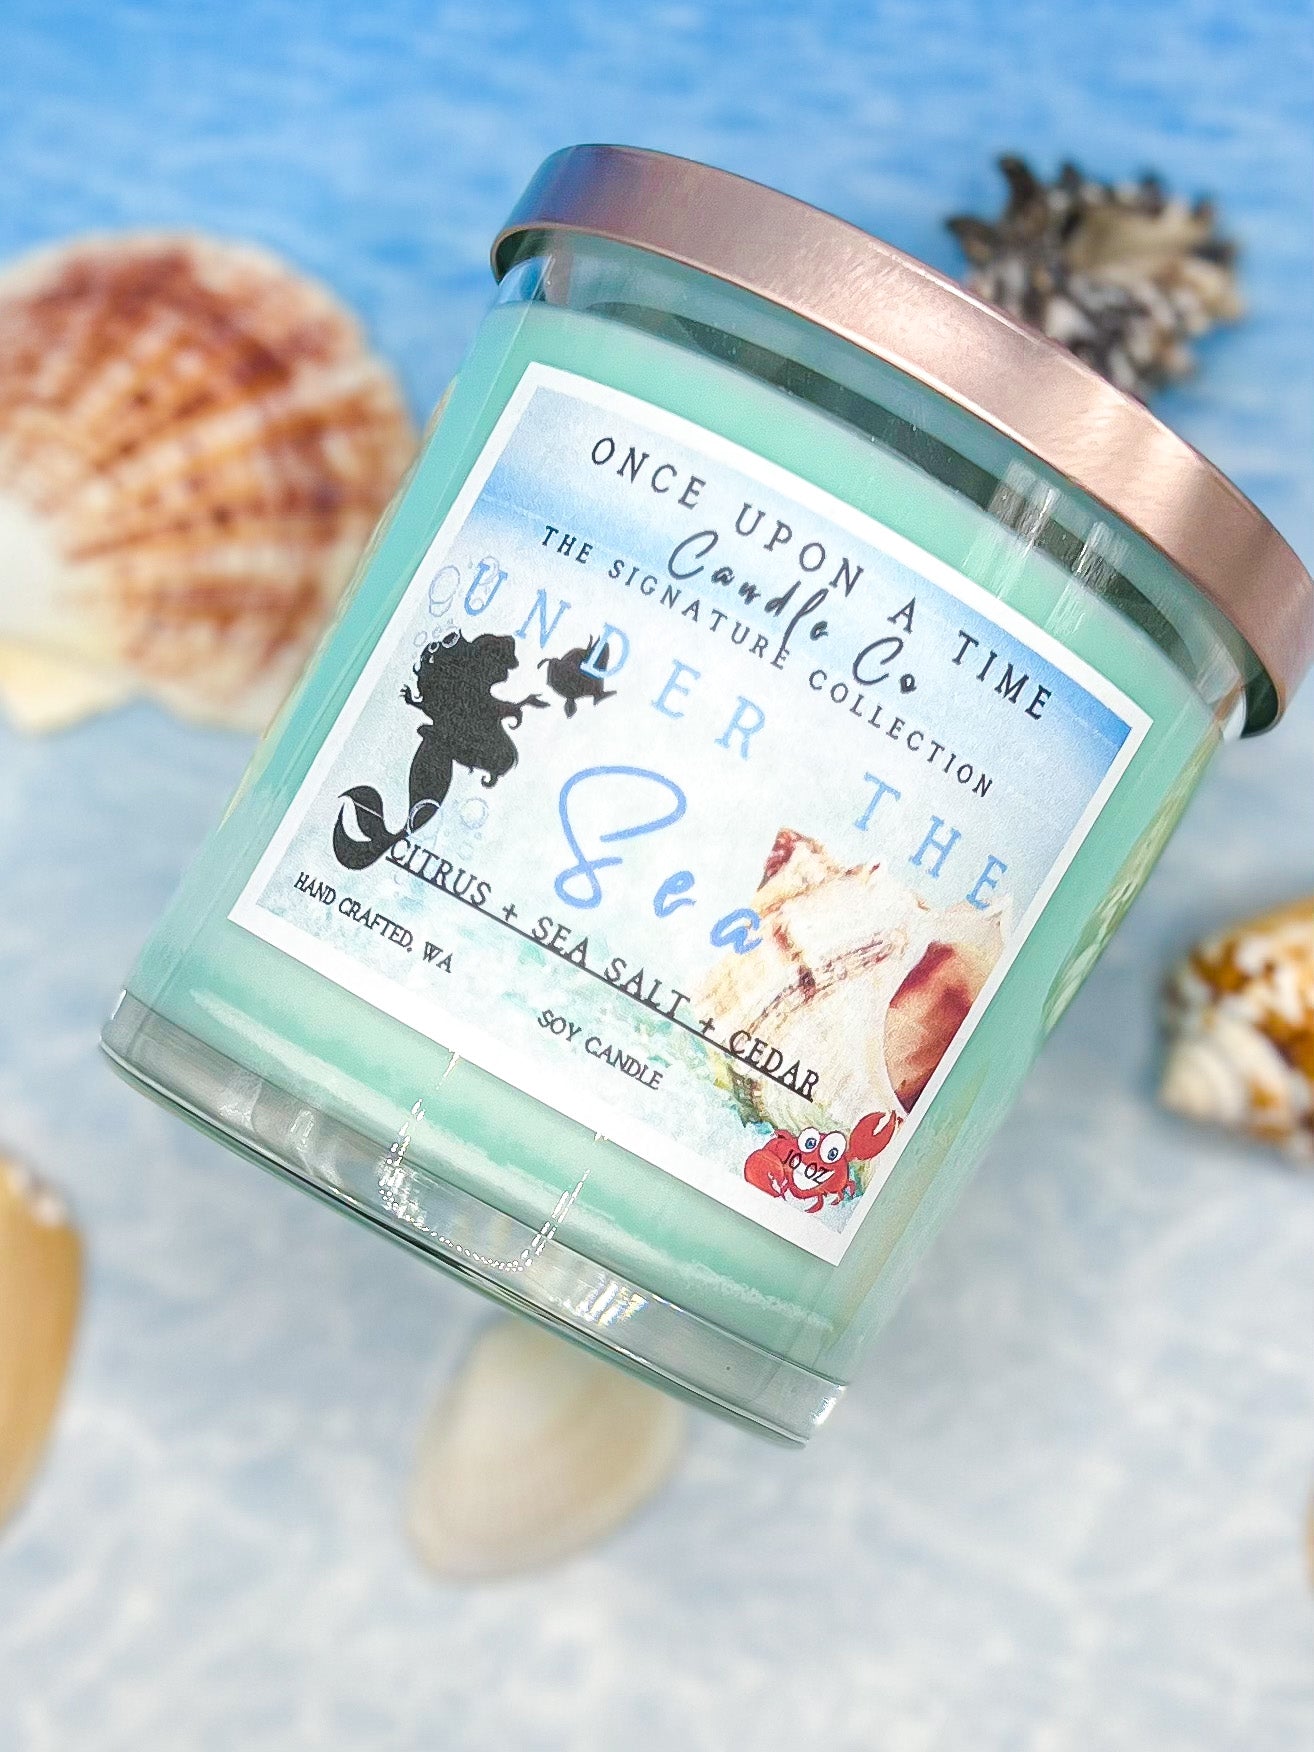 Under The Sea Candle (10 oz)